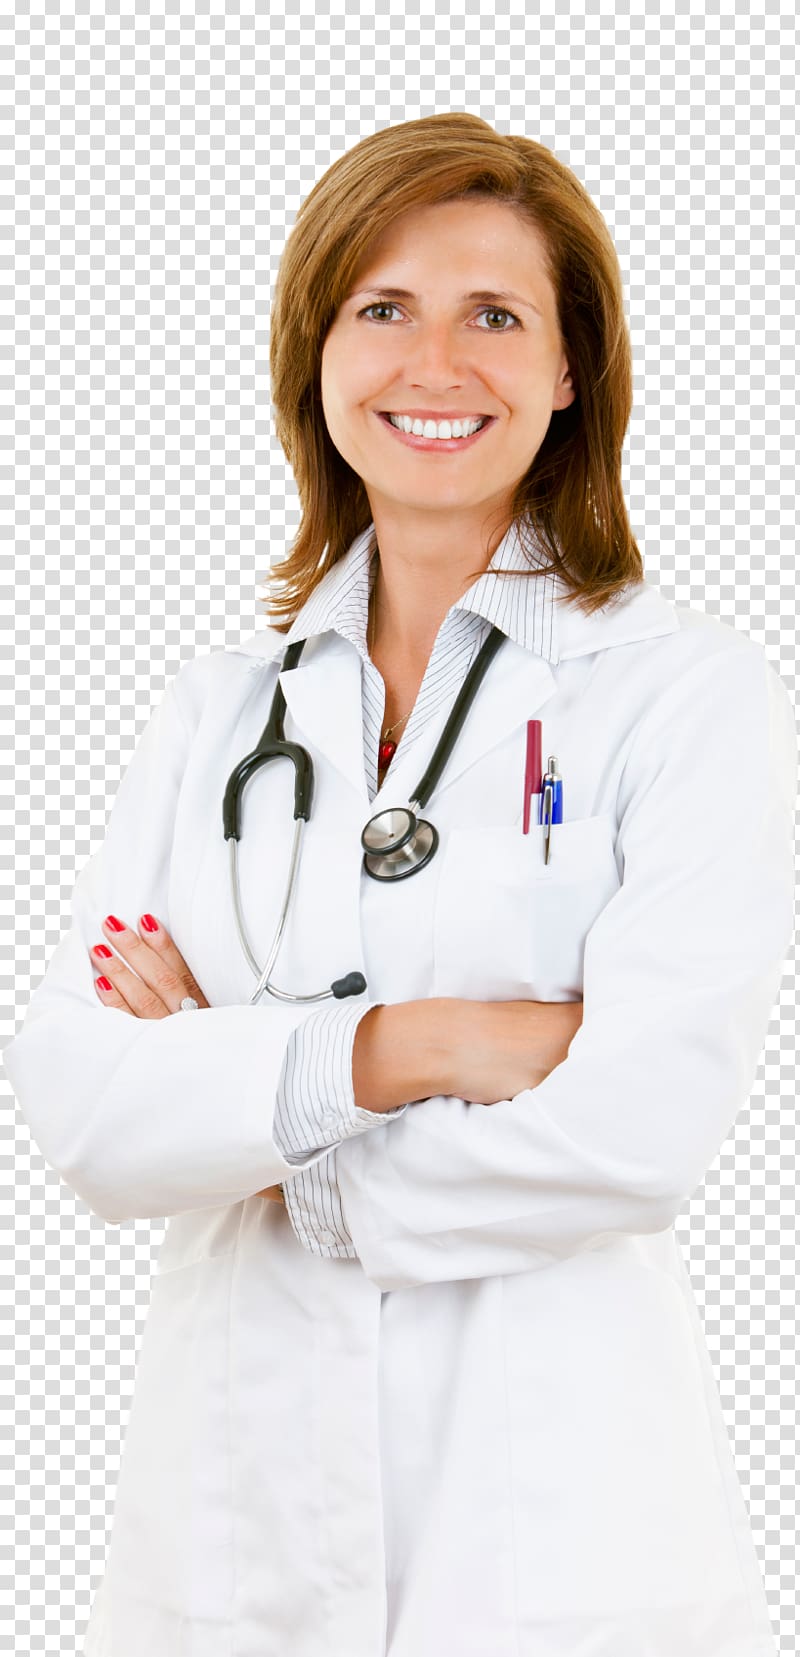 Physician Family medicine Health Care Hospital, female doctor transparent background PNG clipart